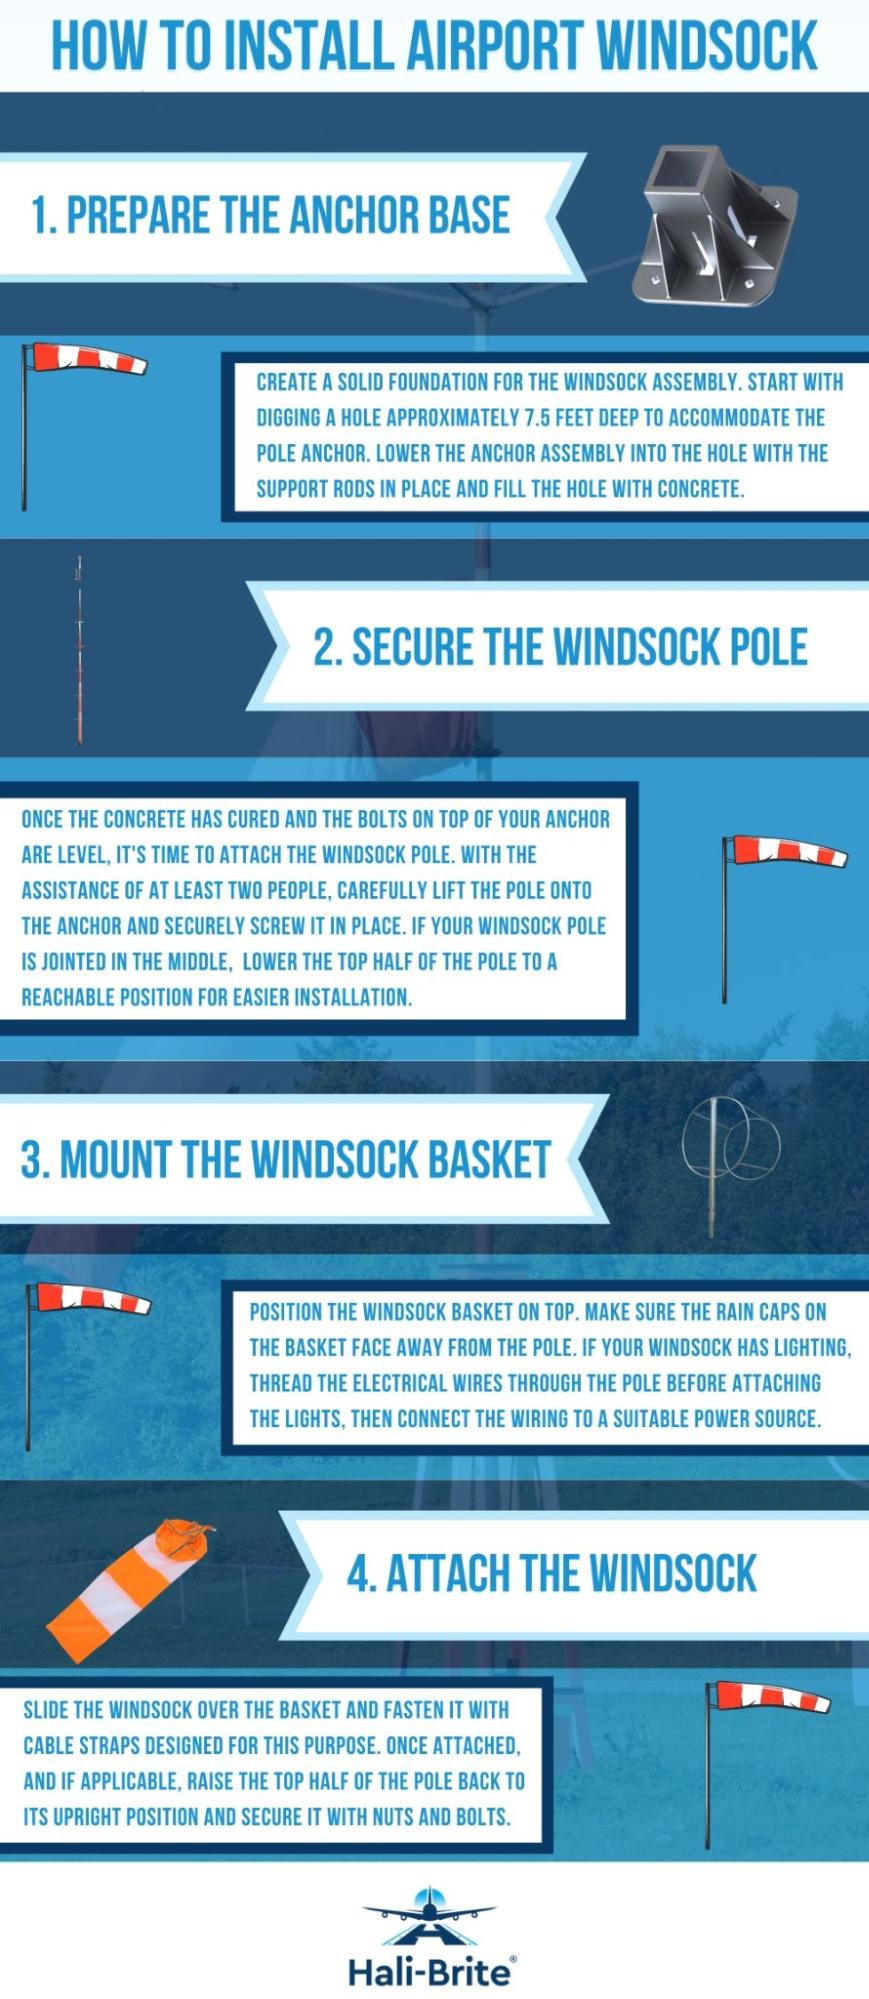 Infographic image of how to install airport windsock